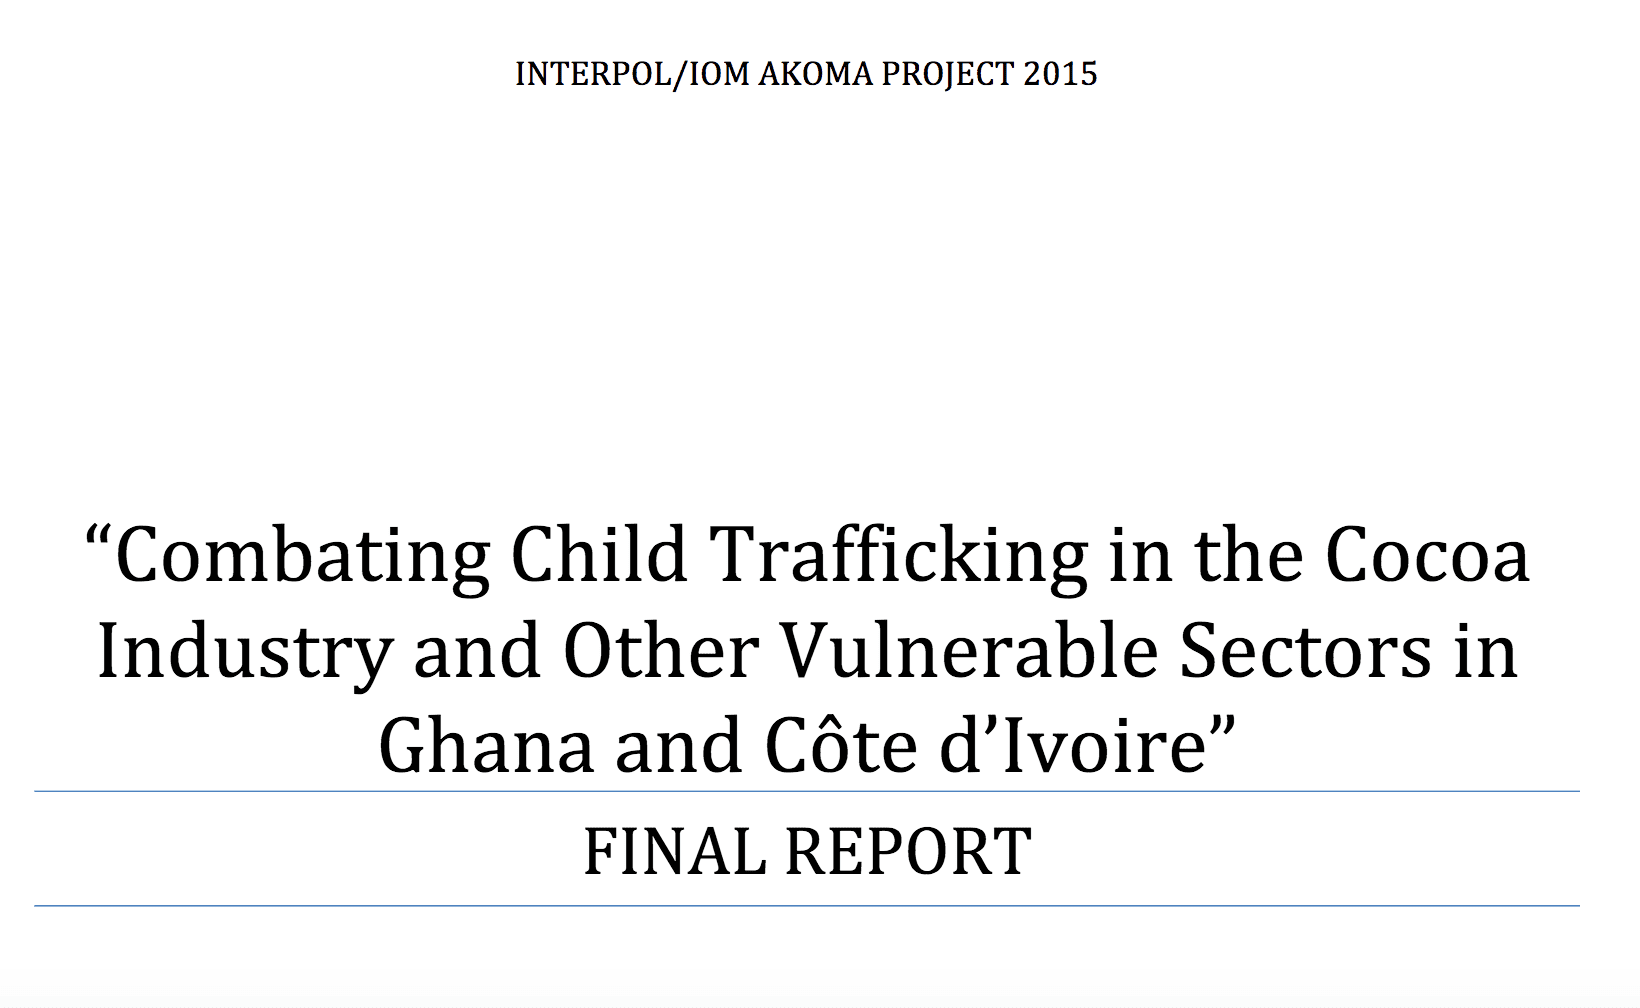 Combating Child Trafficking in the Cocoa Industry and Other Vulnerable Sectors in Ghana and Côte d’Ivoire